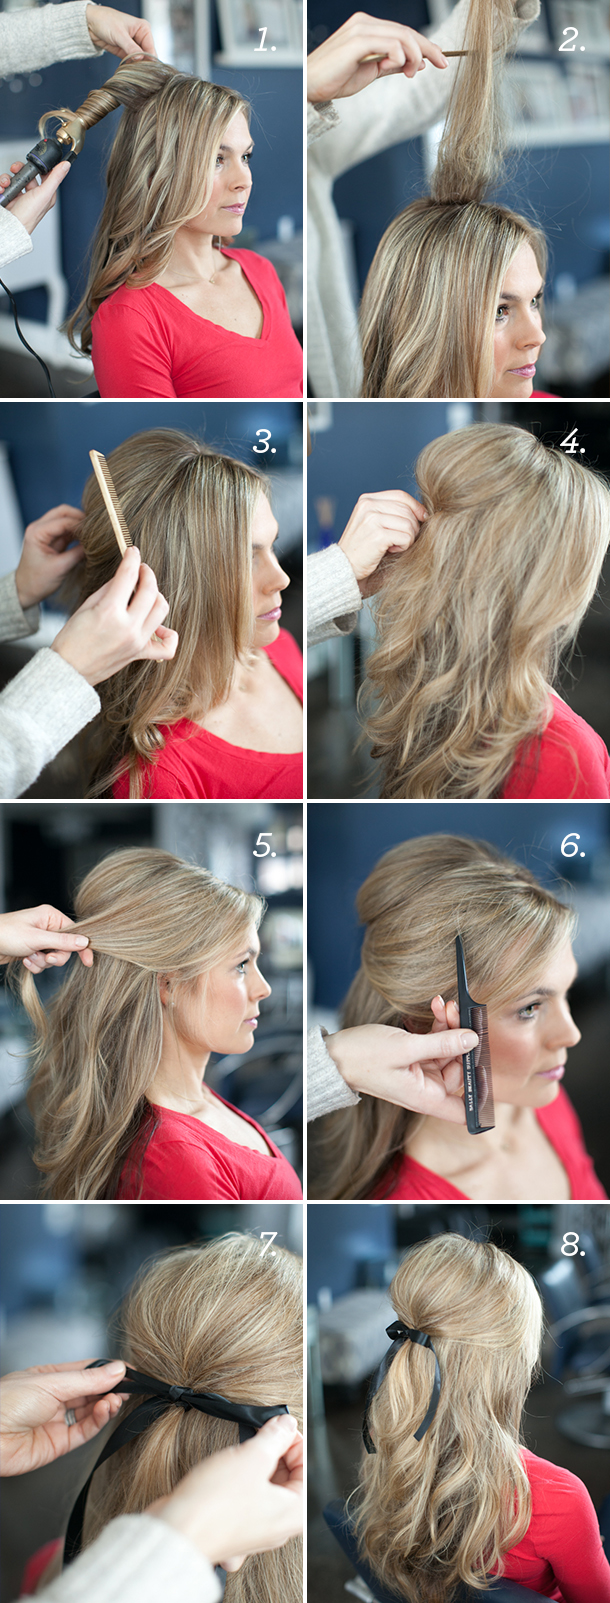 15 Super Easy Half Up Hairstyle Tutorials You Have To Try